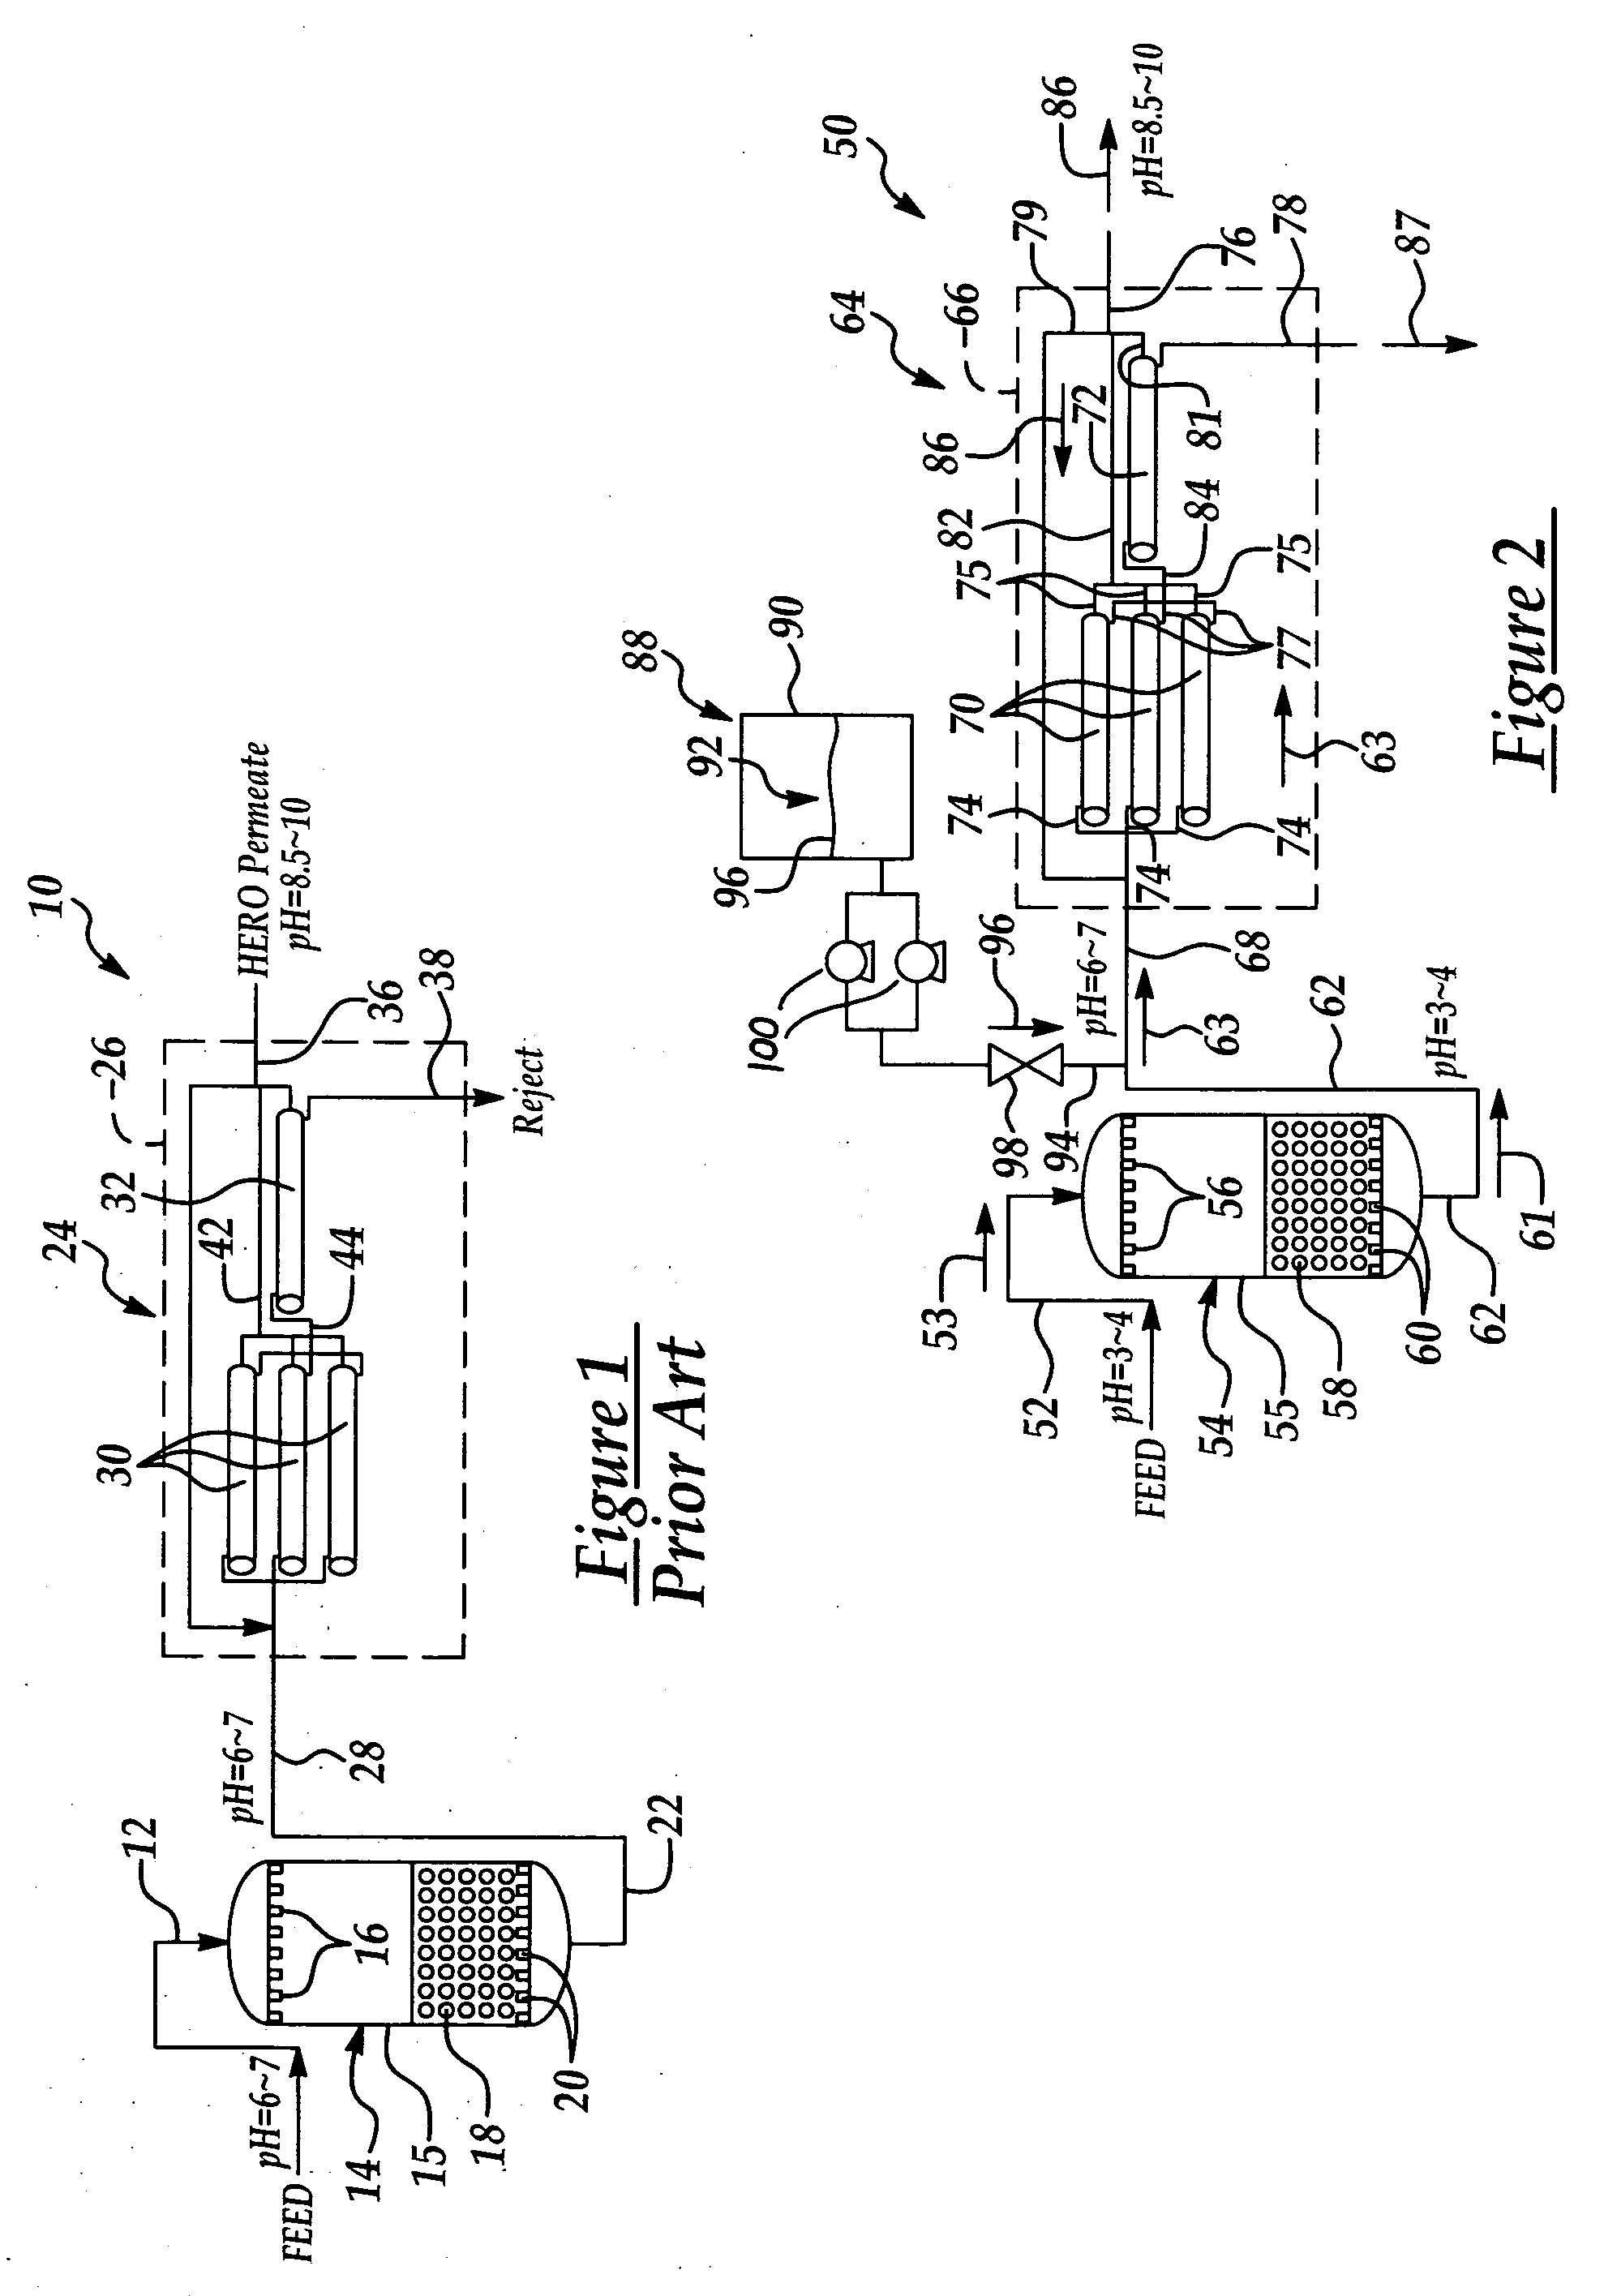 Base dosing water purification system and method